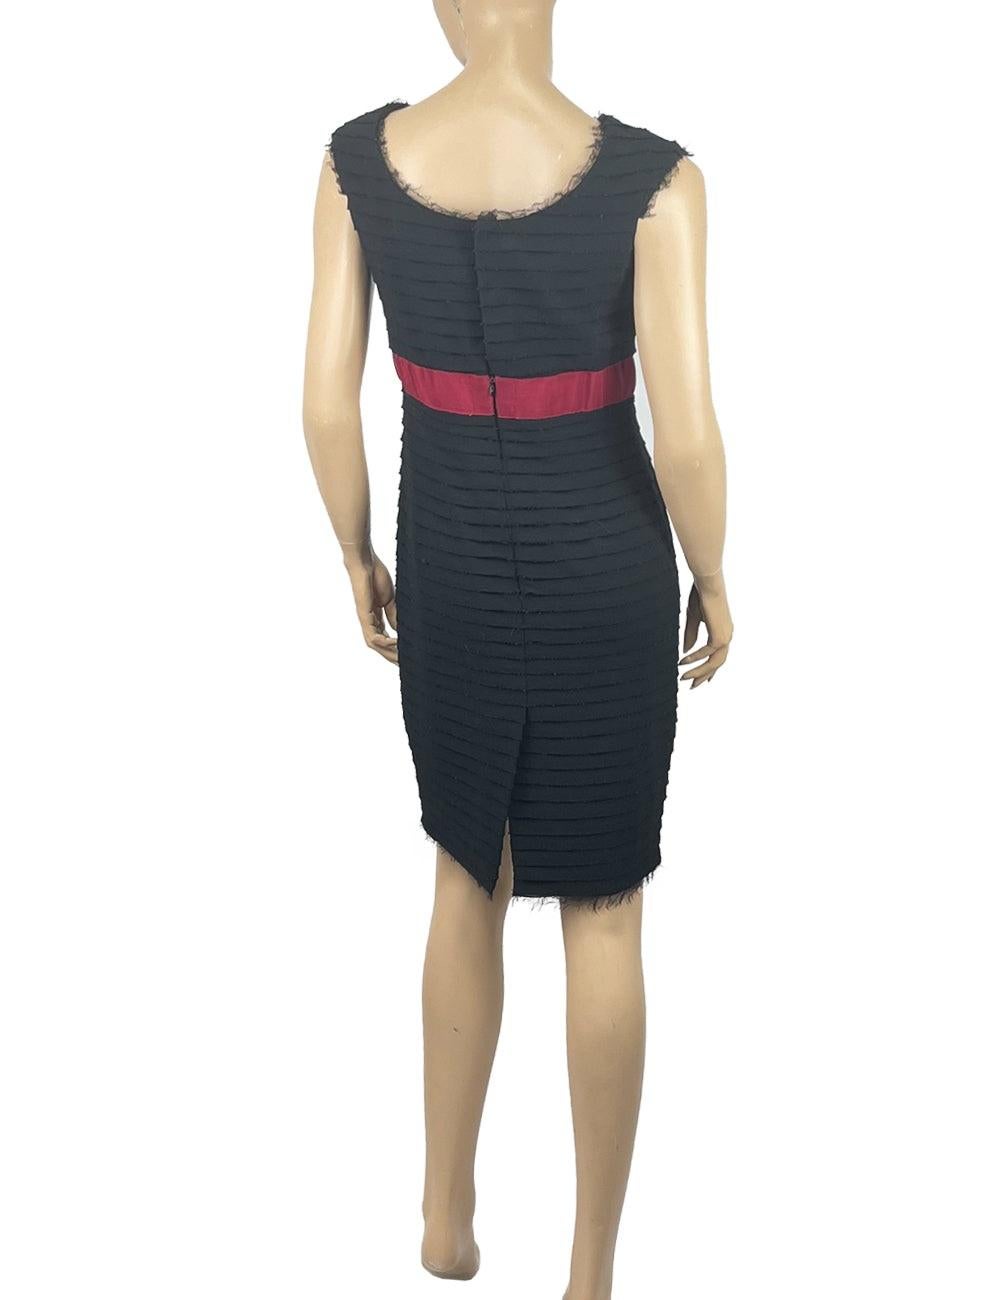 Chanel EU 38 Black Cap Sleeve Cocktail Tiered Bow Sheath Wool Dress In Good Condition For Sale In Amman, JO